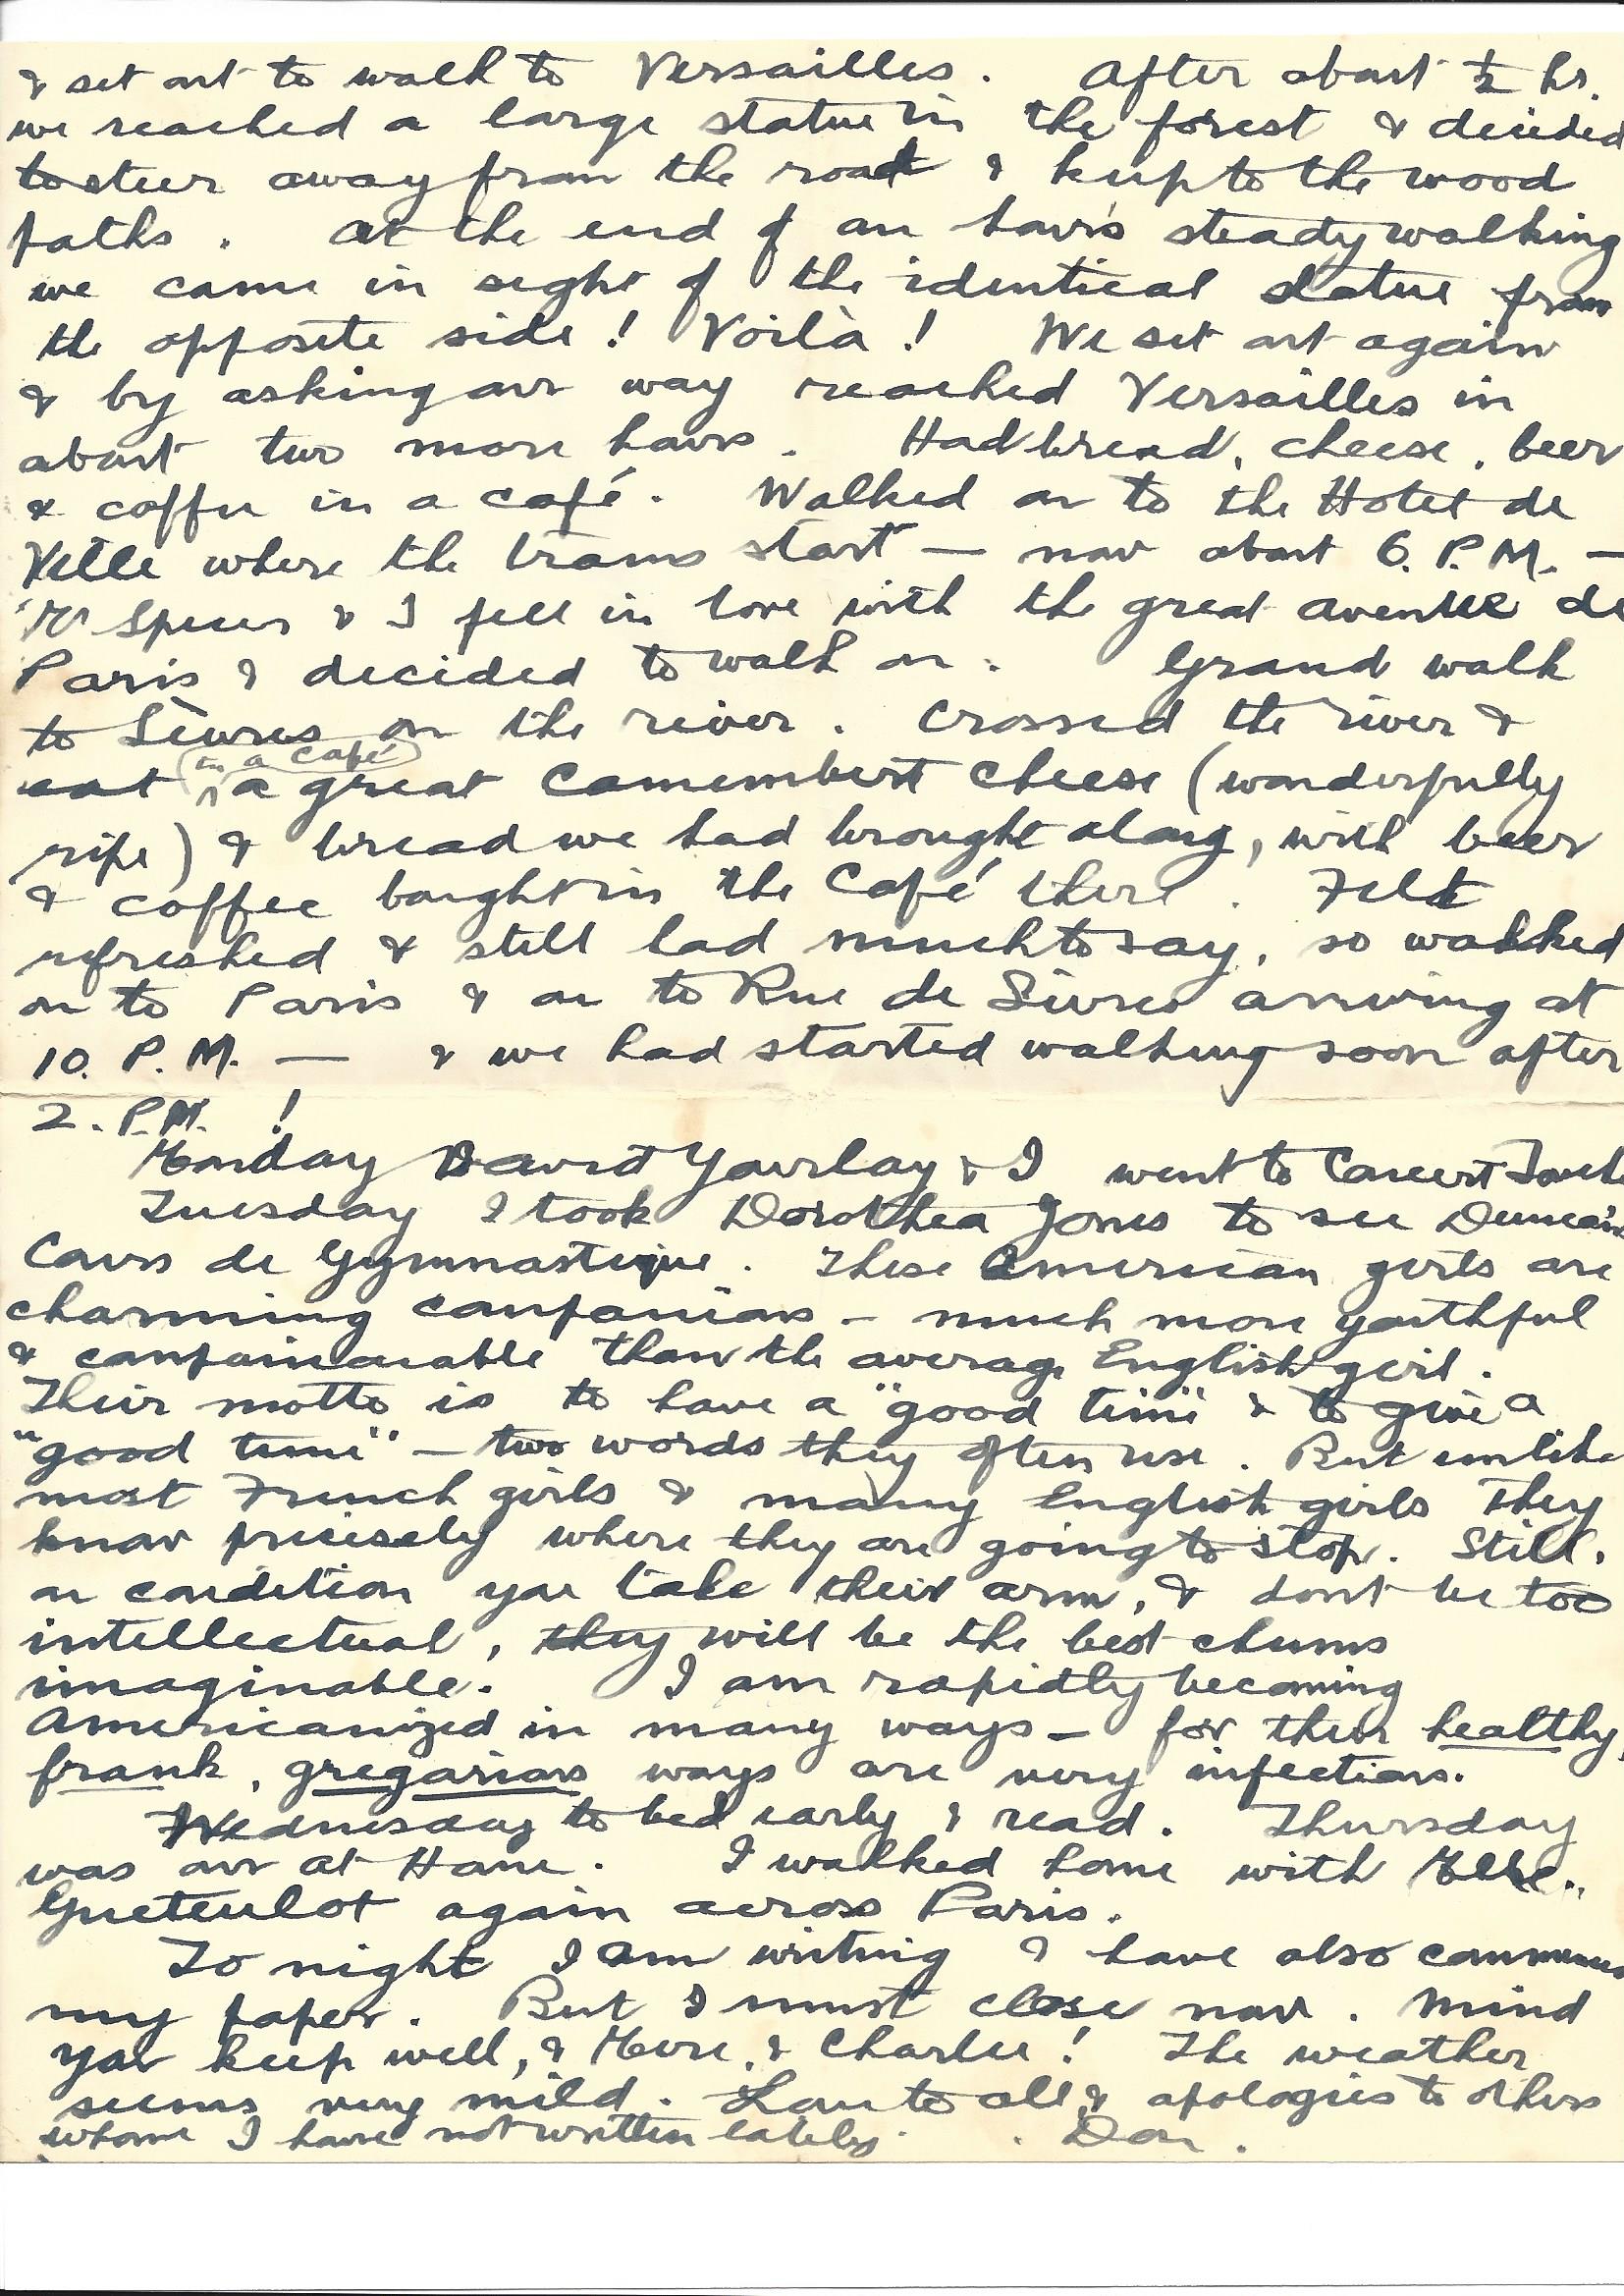 1920-01-30 page 3 letter by Donald Bearman